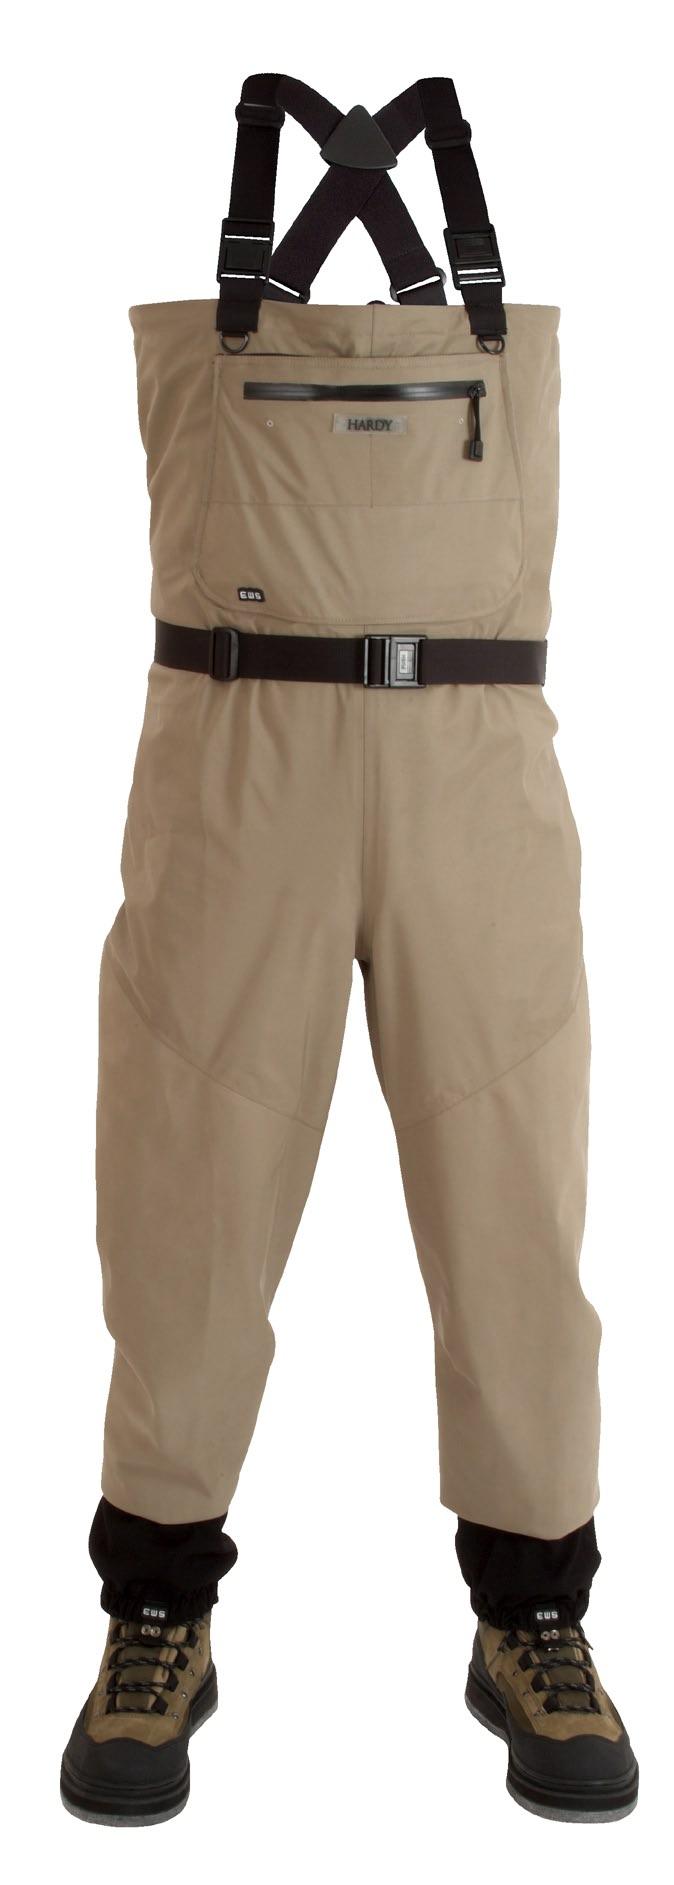 EWS Waders Hardy EWS waders are designed with a Hybrid 4 and 5 layer construction that offers unparalleled levels of comfort and function.